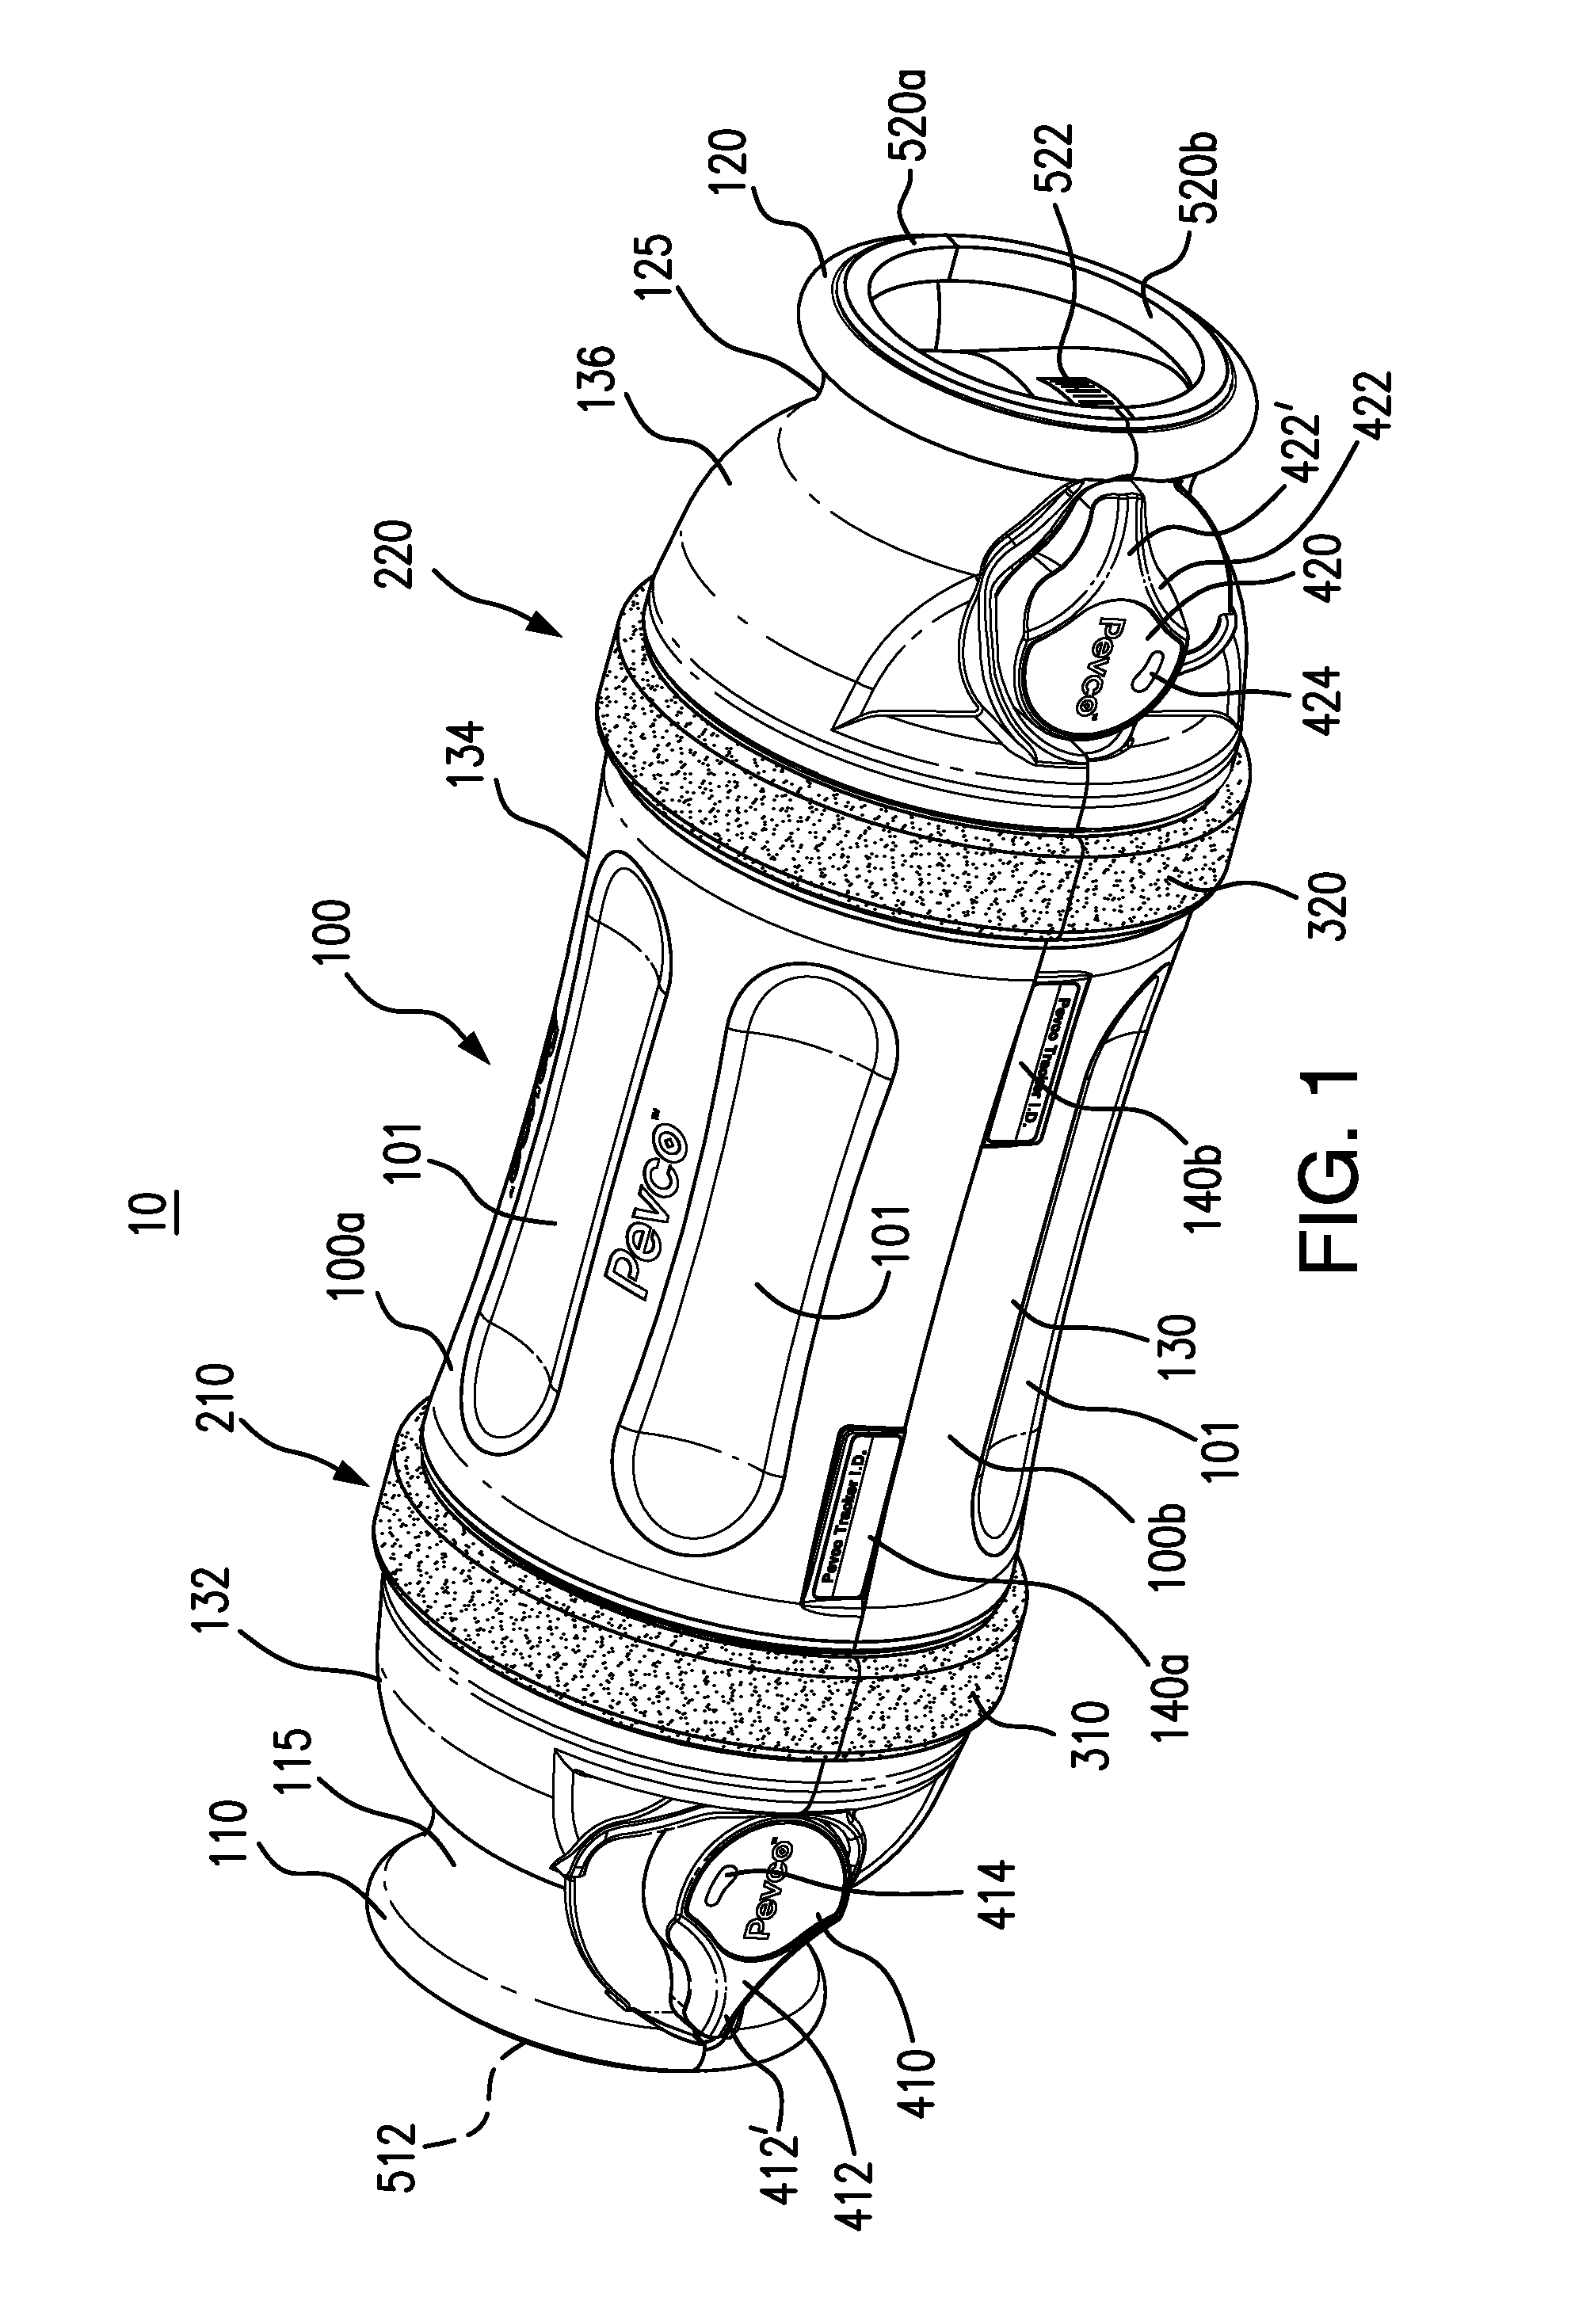 Carrier apparatus for pneumatic tube delivery system